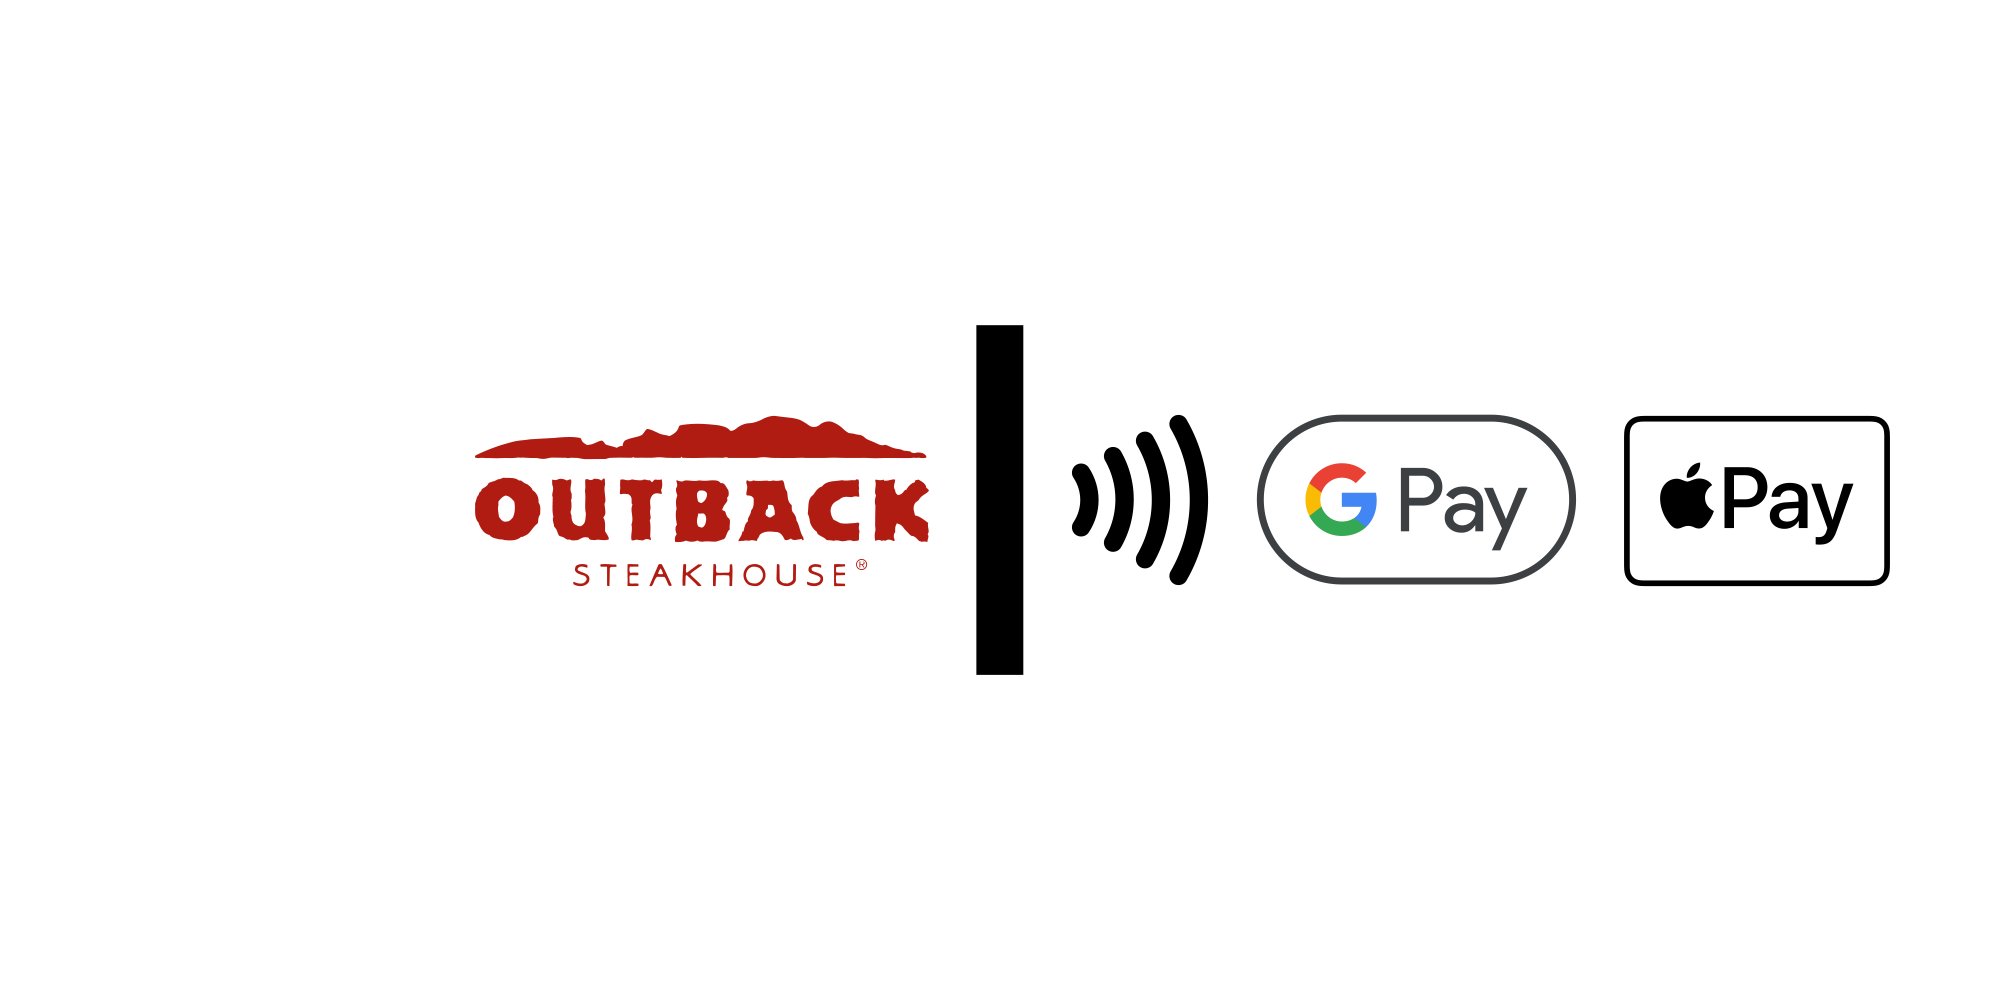 Outback accepts contactless payments, as well as Google Pay & Apple Pay online/in-app.